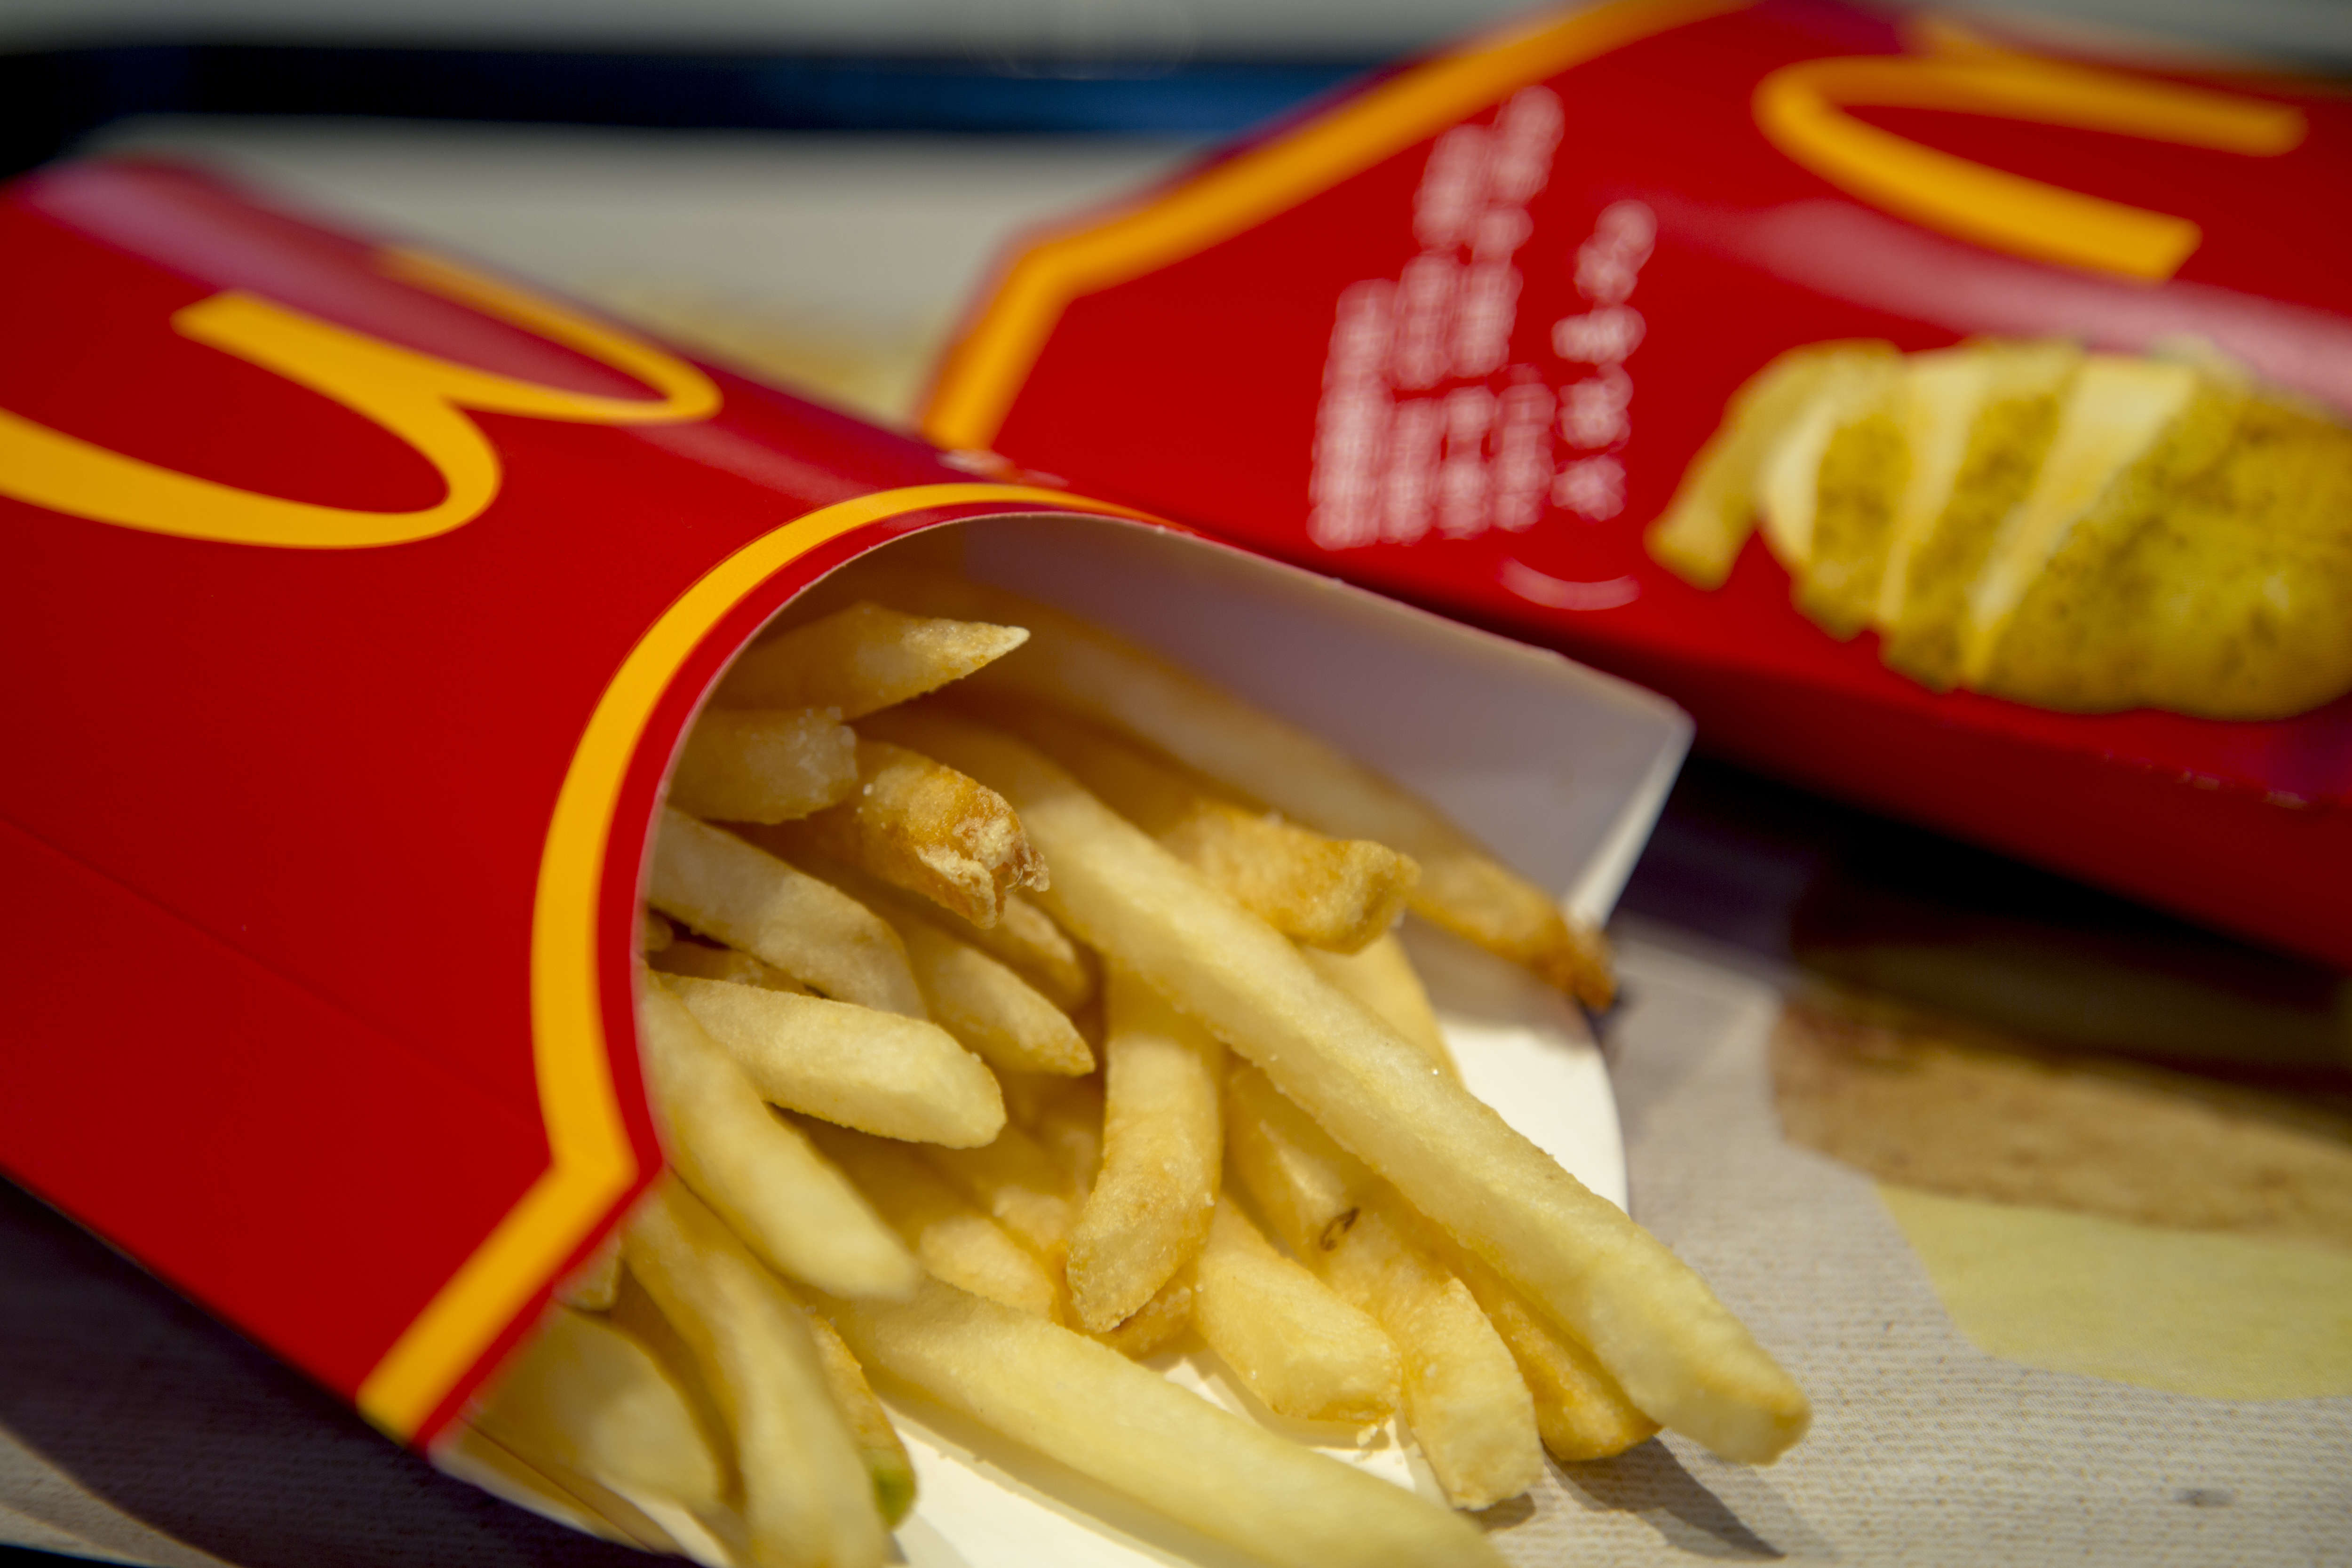 You Can Get Free McDonald’s French Fries Today and Next Friday. Here’s How